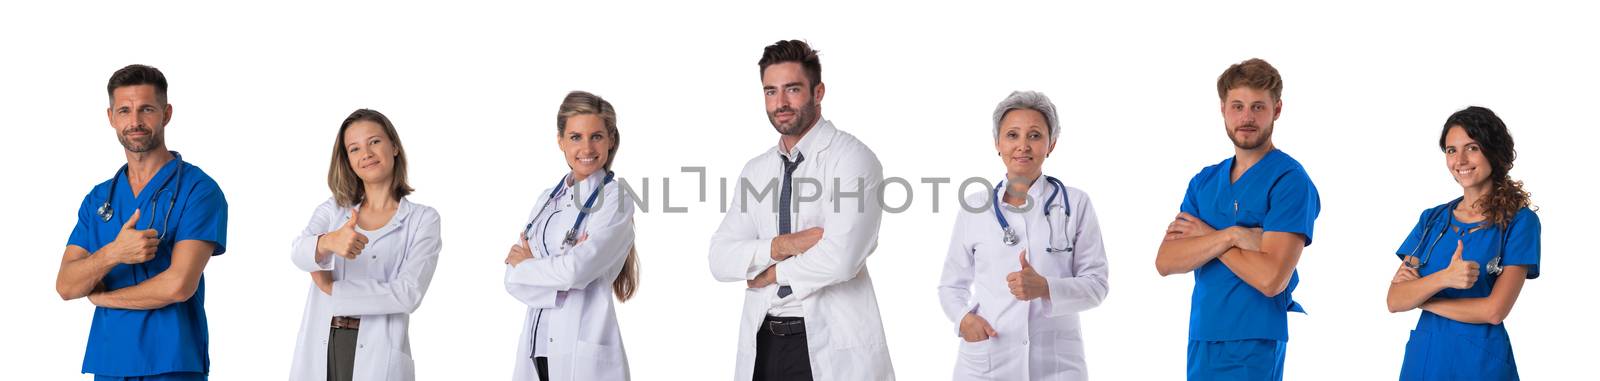 Collection of portraits of medical doctors. Design element, studio isolated on white background